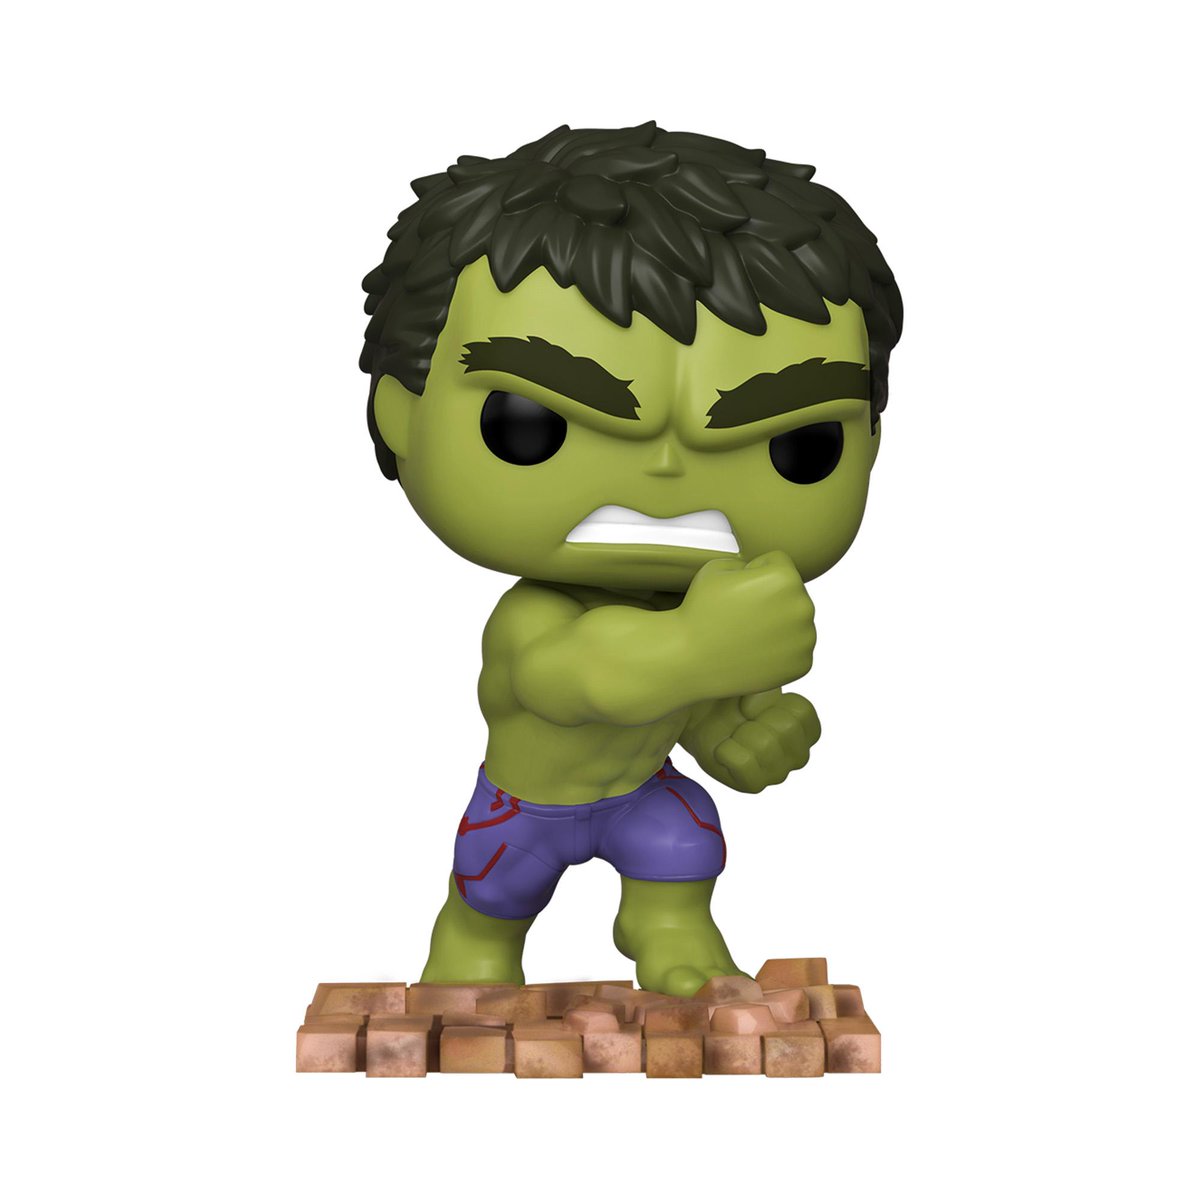 RT & follow @OriginalFunko for the chance to WIN this Funko HQ exclusive Hulk Pop! #FunkoHoliday #FunkoGiveaway #giveaway